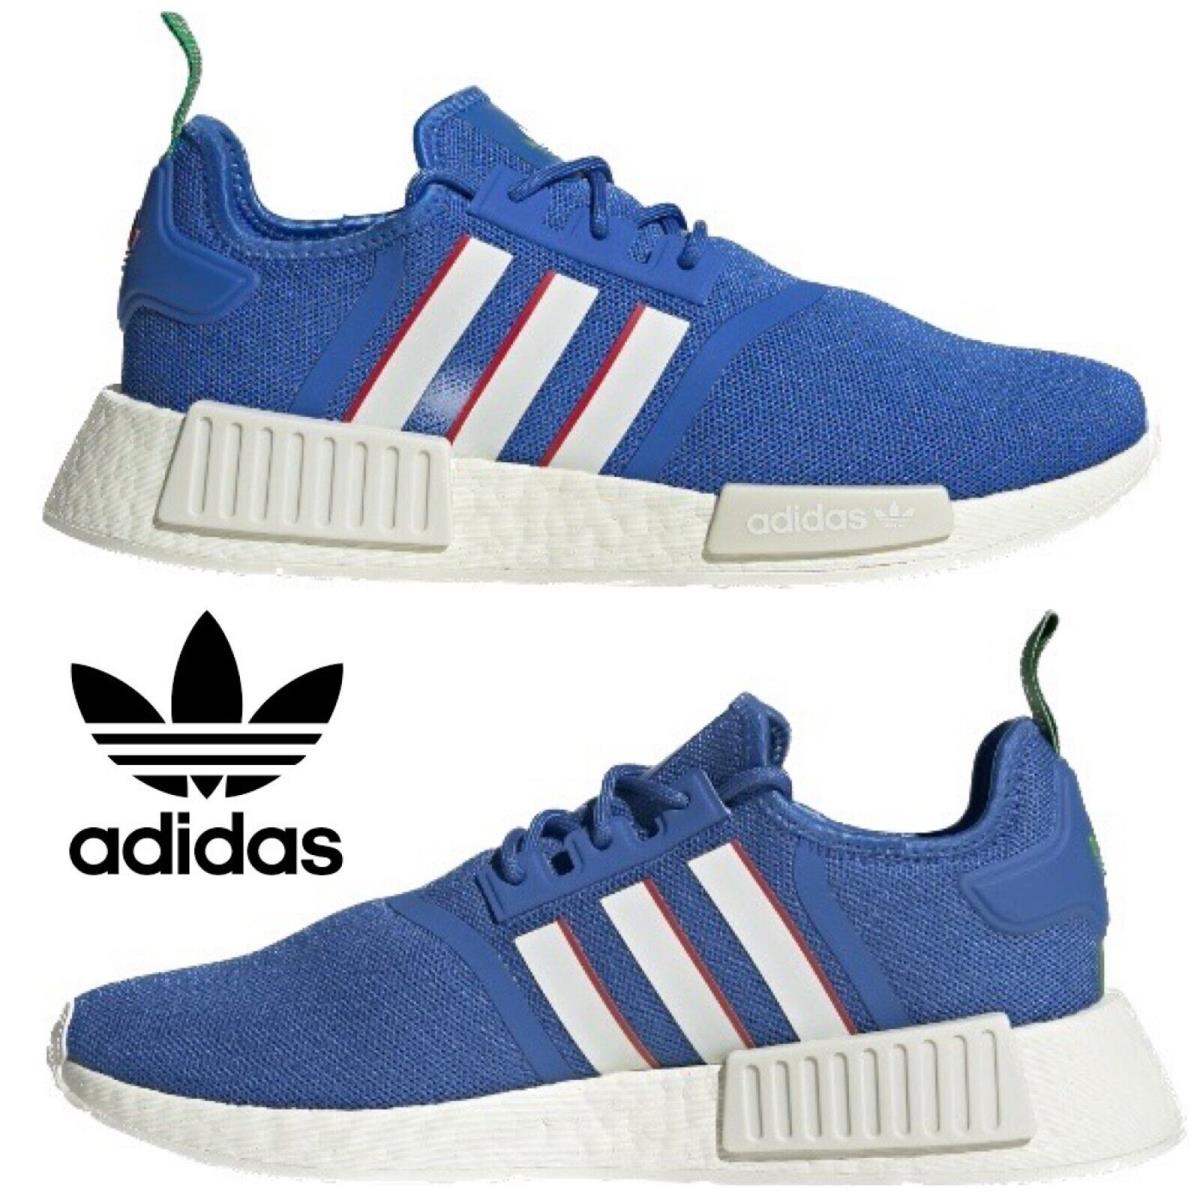 Adidas Originals Nmd R1 Men`s Sneakers Running Shoes Gym Casual Sport Blue